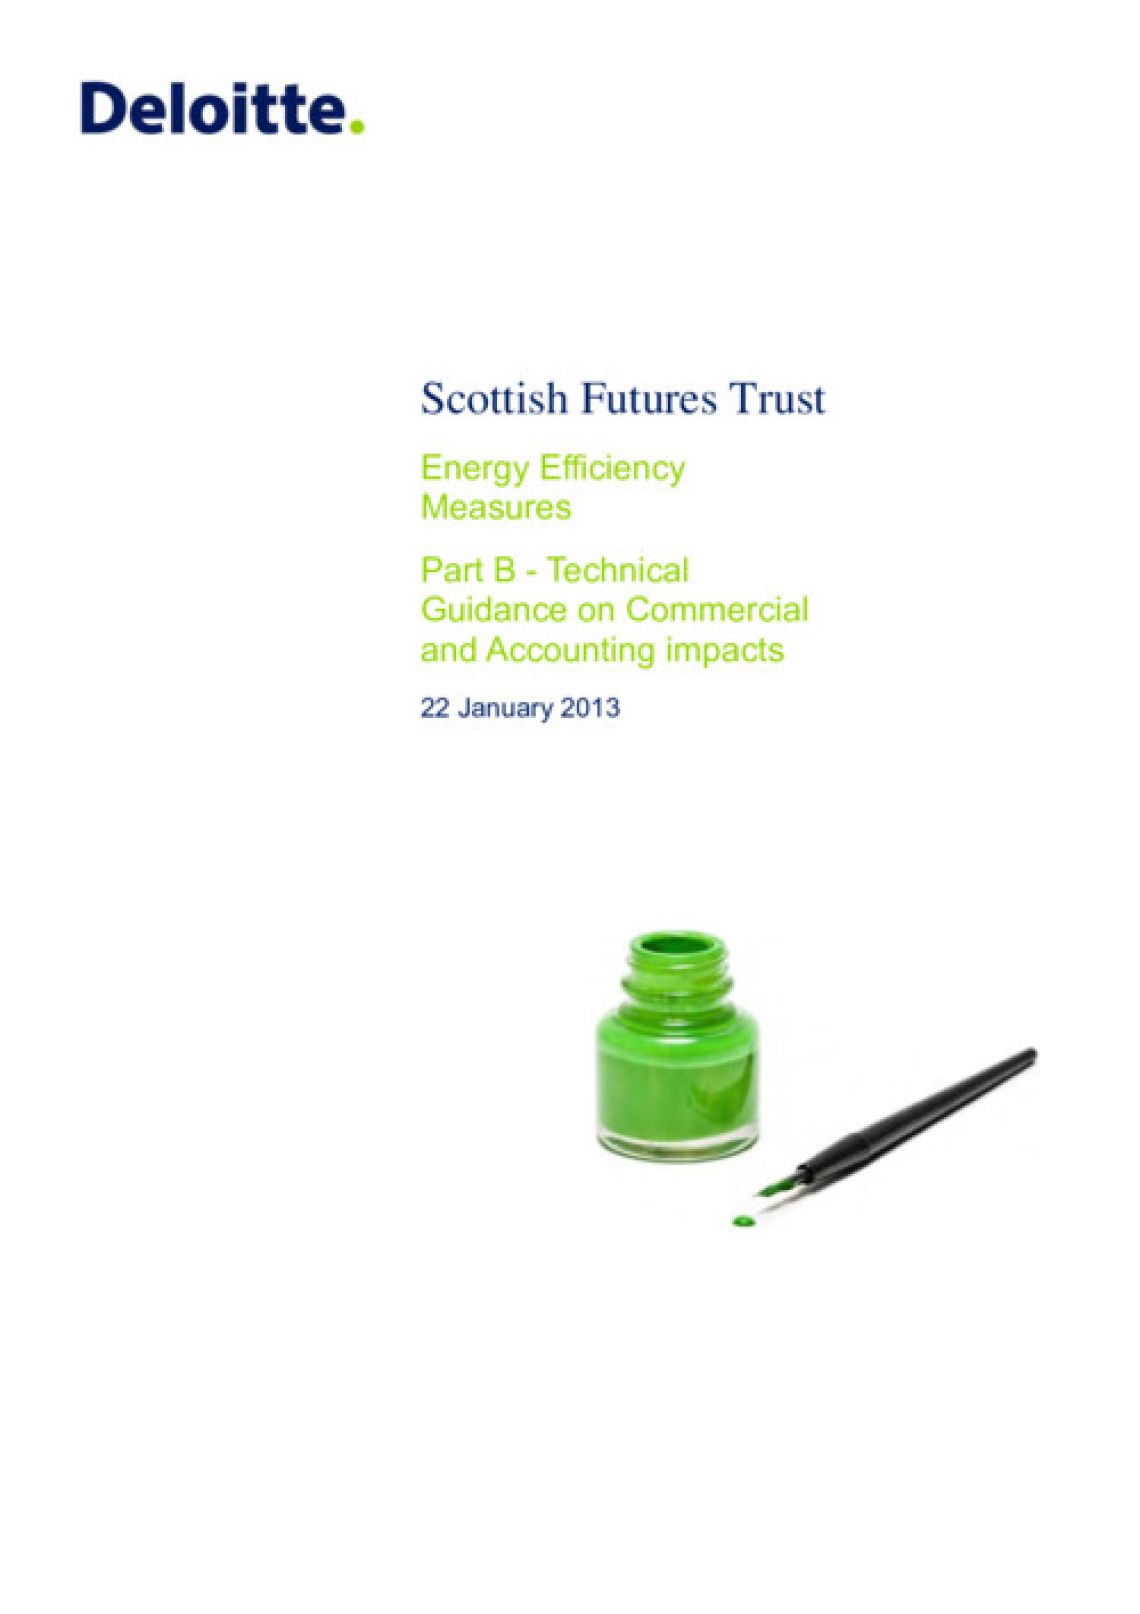 SFT Energy Efficiency Measures - Technical Guidance and Accounting Impacts - Part B cover